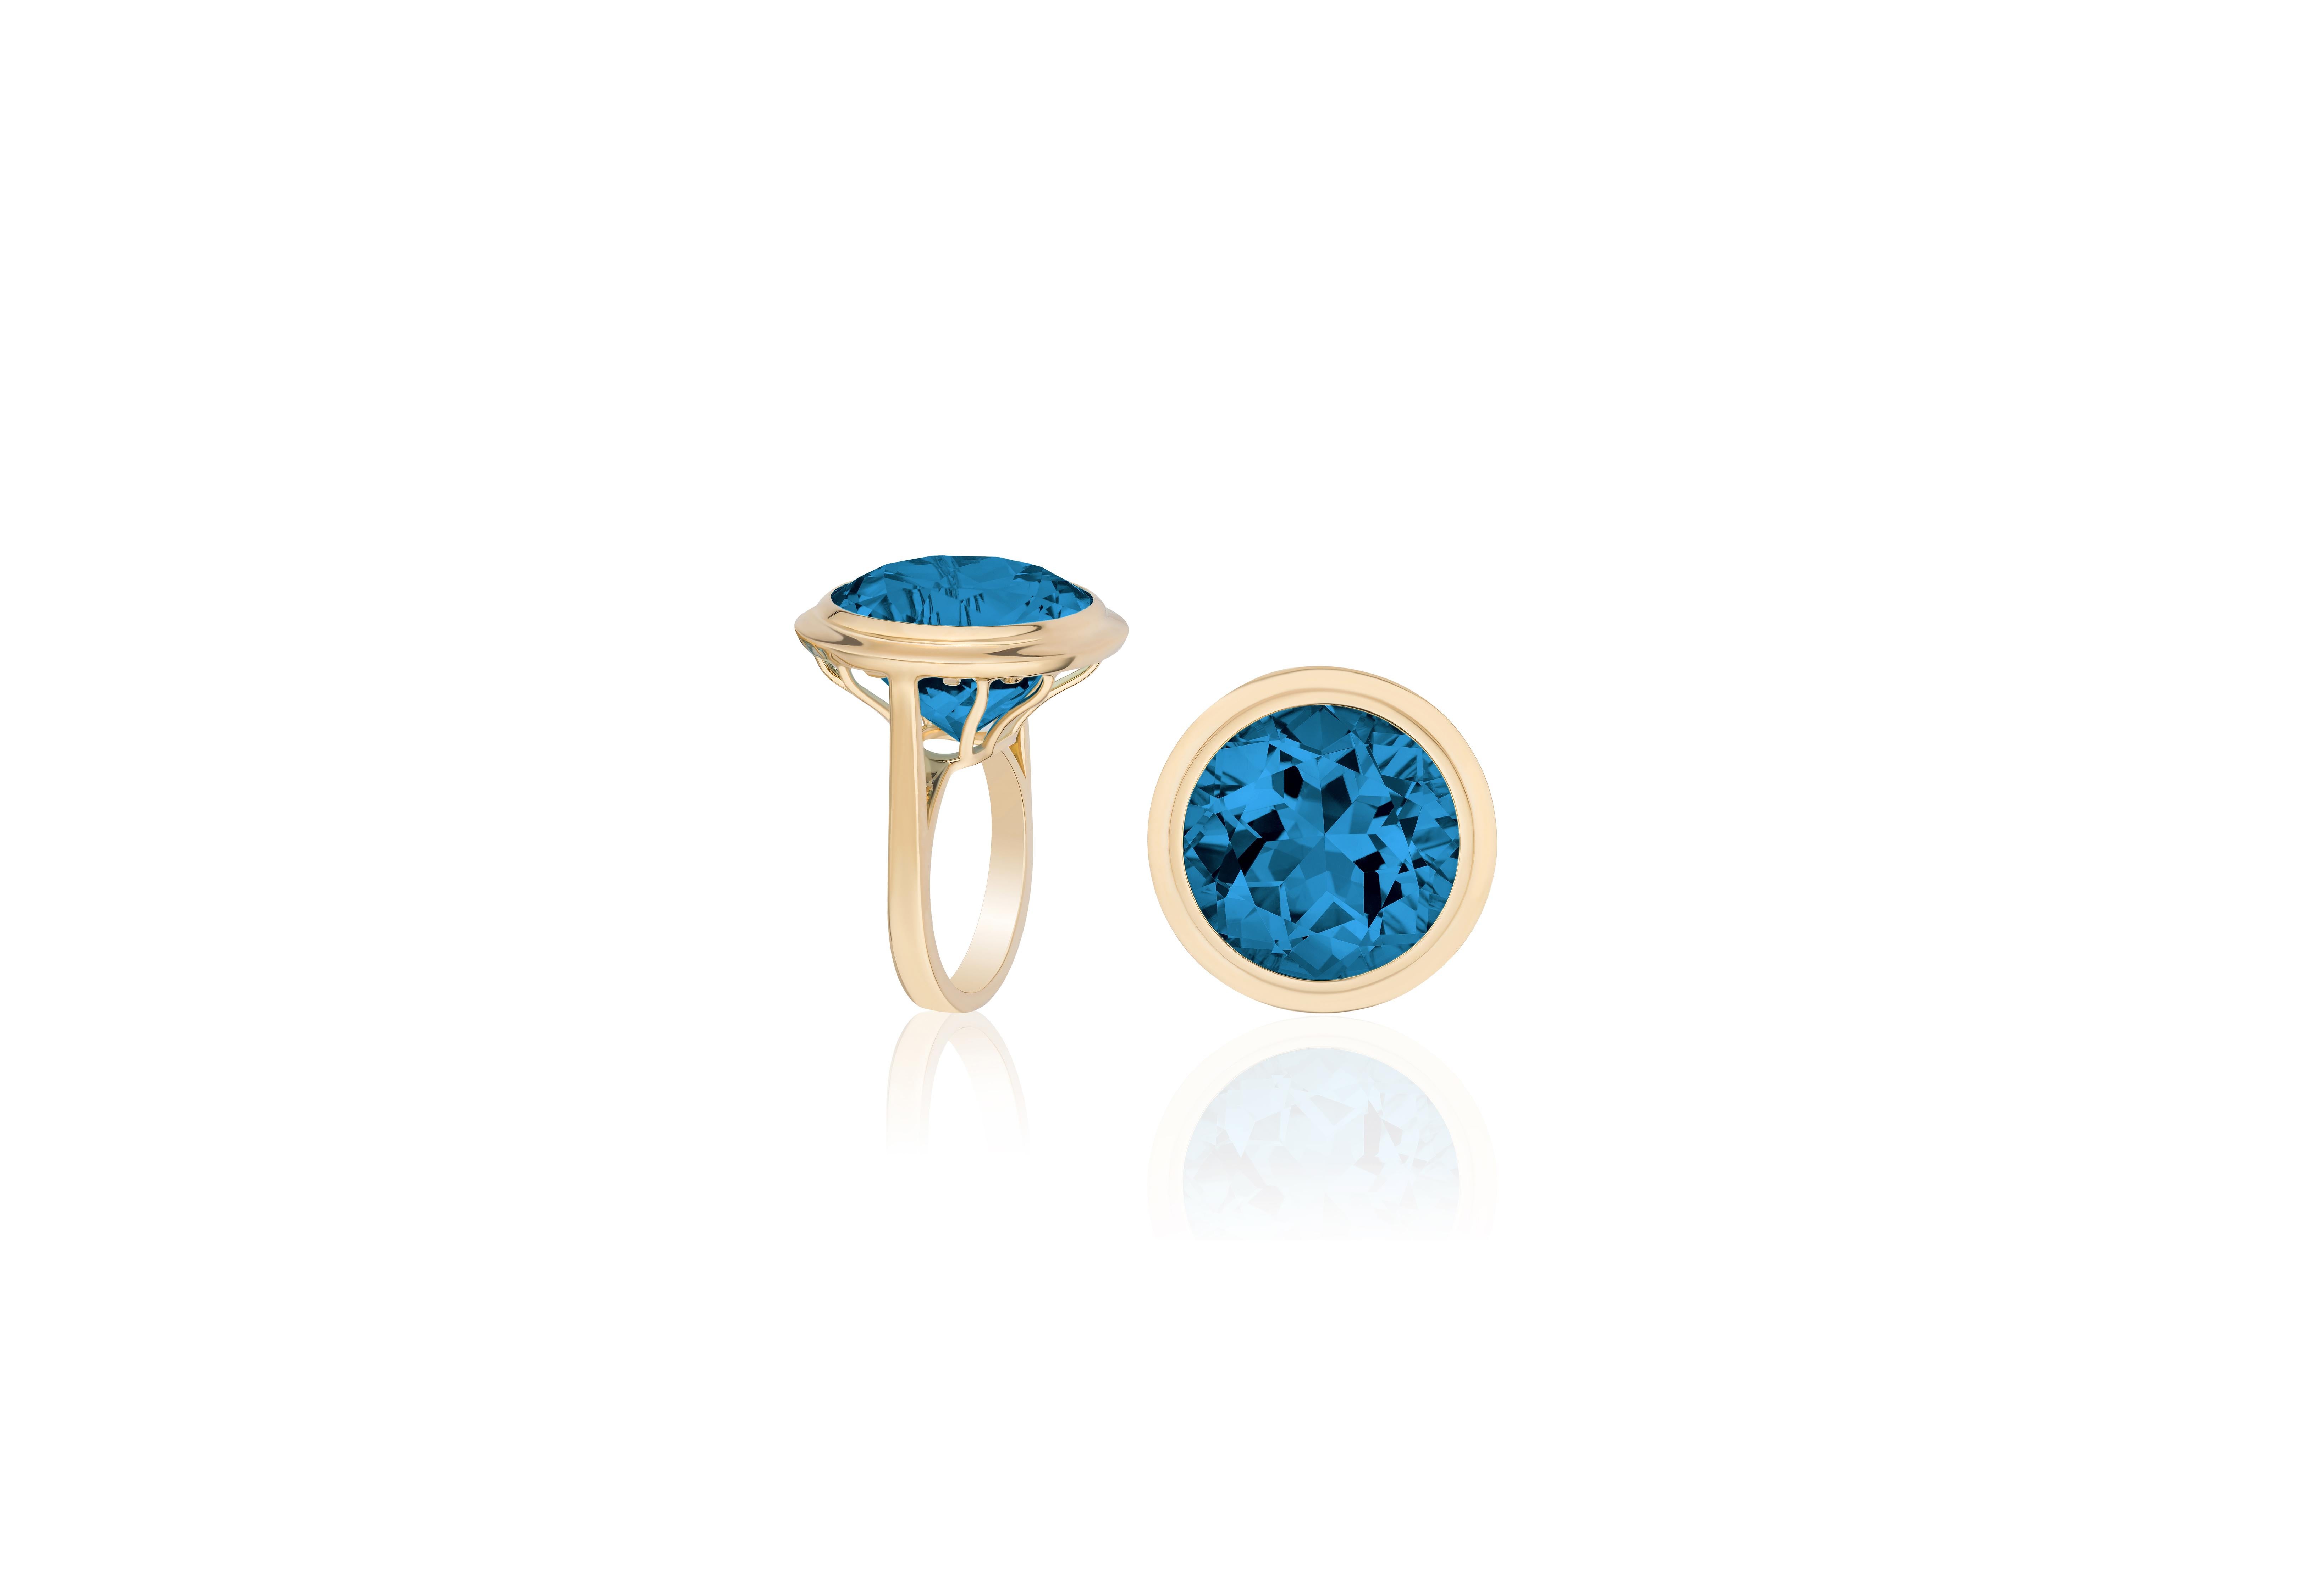 Faceted Round London Blue Topaz Ring in 18K Yellow Gold, from 'G-One' Collection. 
Our G-One Collection undeniably carries the most special pieces of Goshwara. The sought-after, one-of-a-kind pieces speak to each unique personality of the person